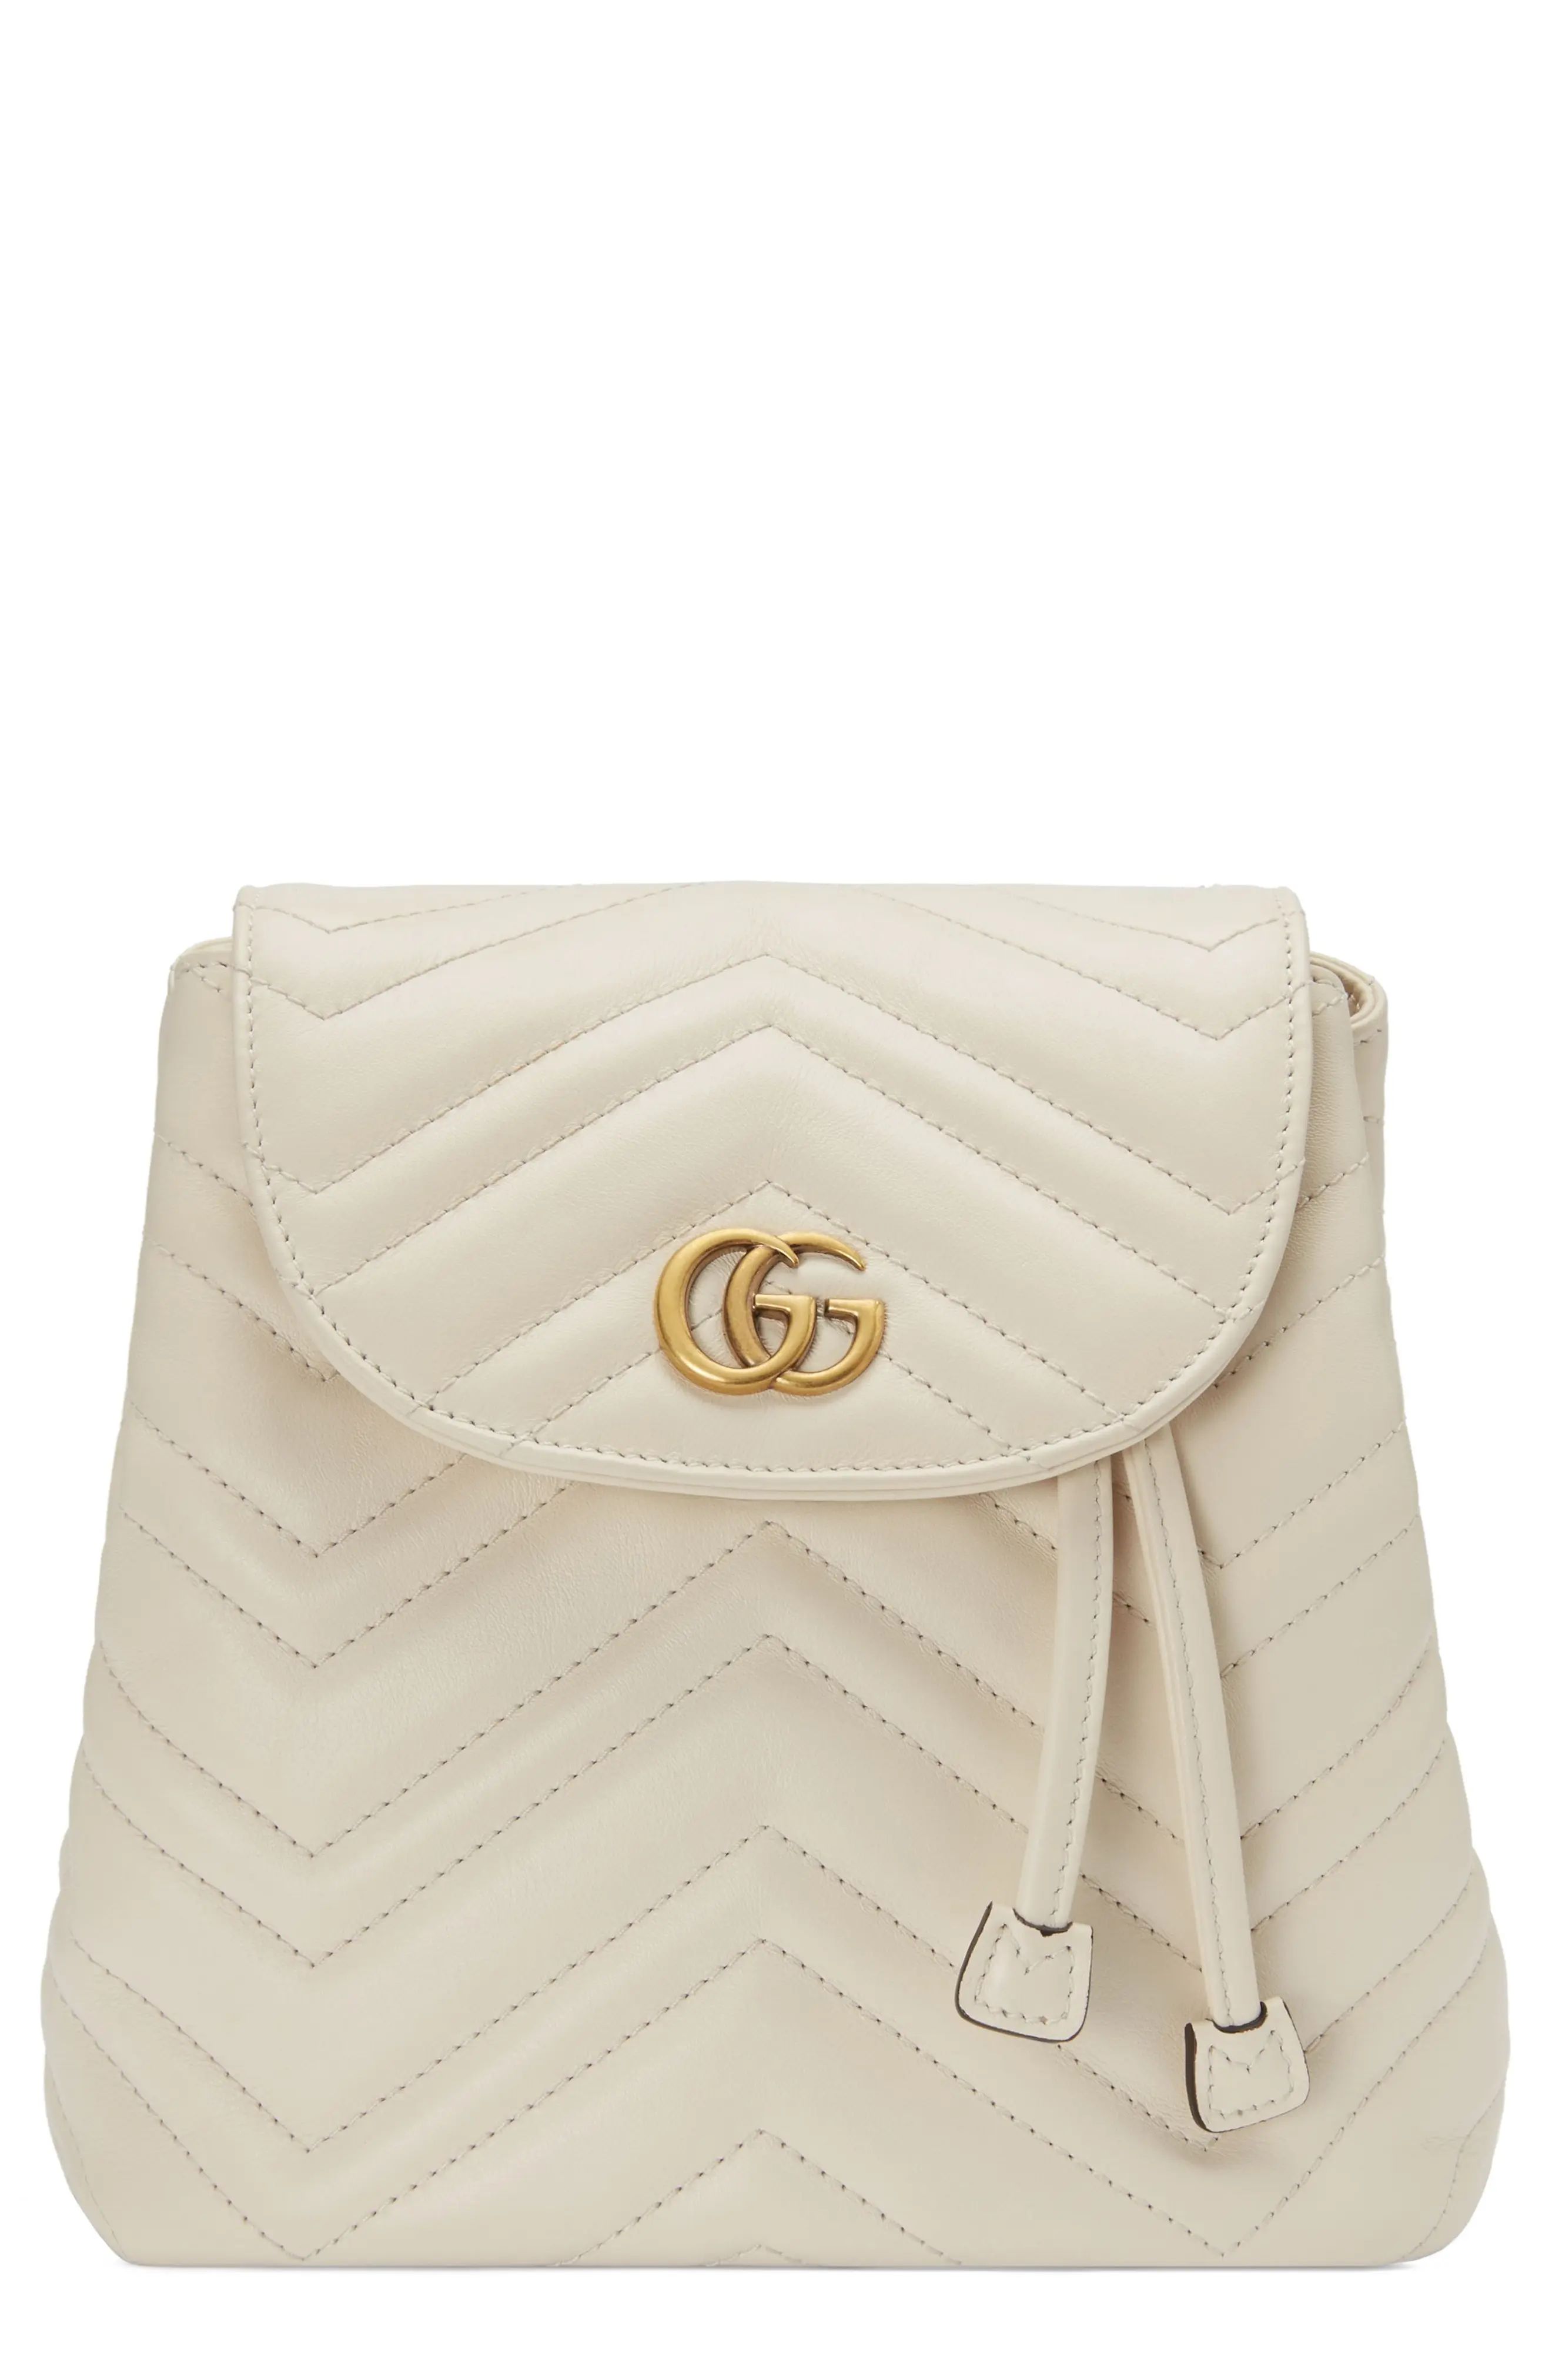 Gucci Gg Marmont 2.0 Matelasse Leather Mini Backpack - White | Nordstrom